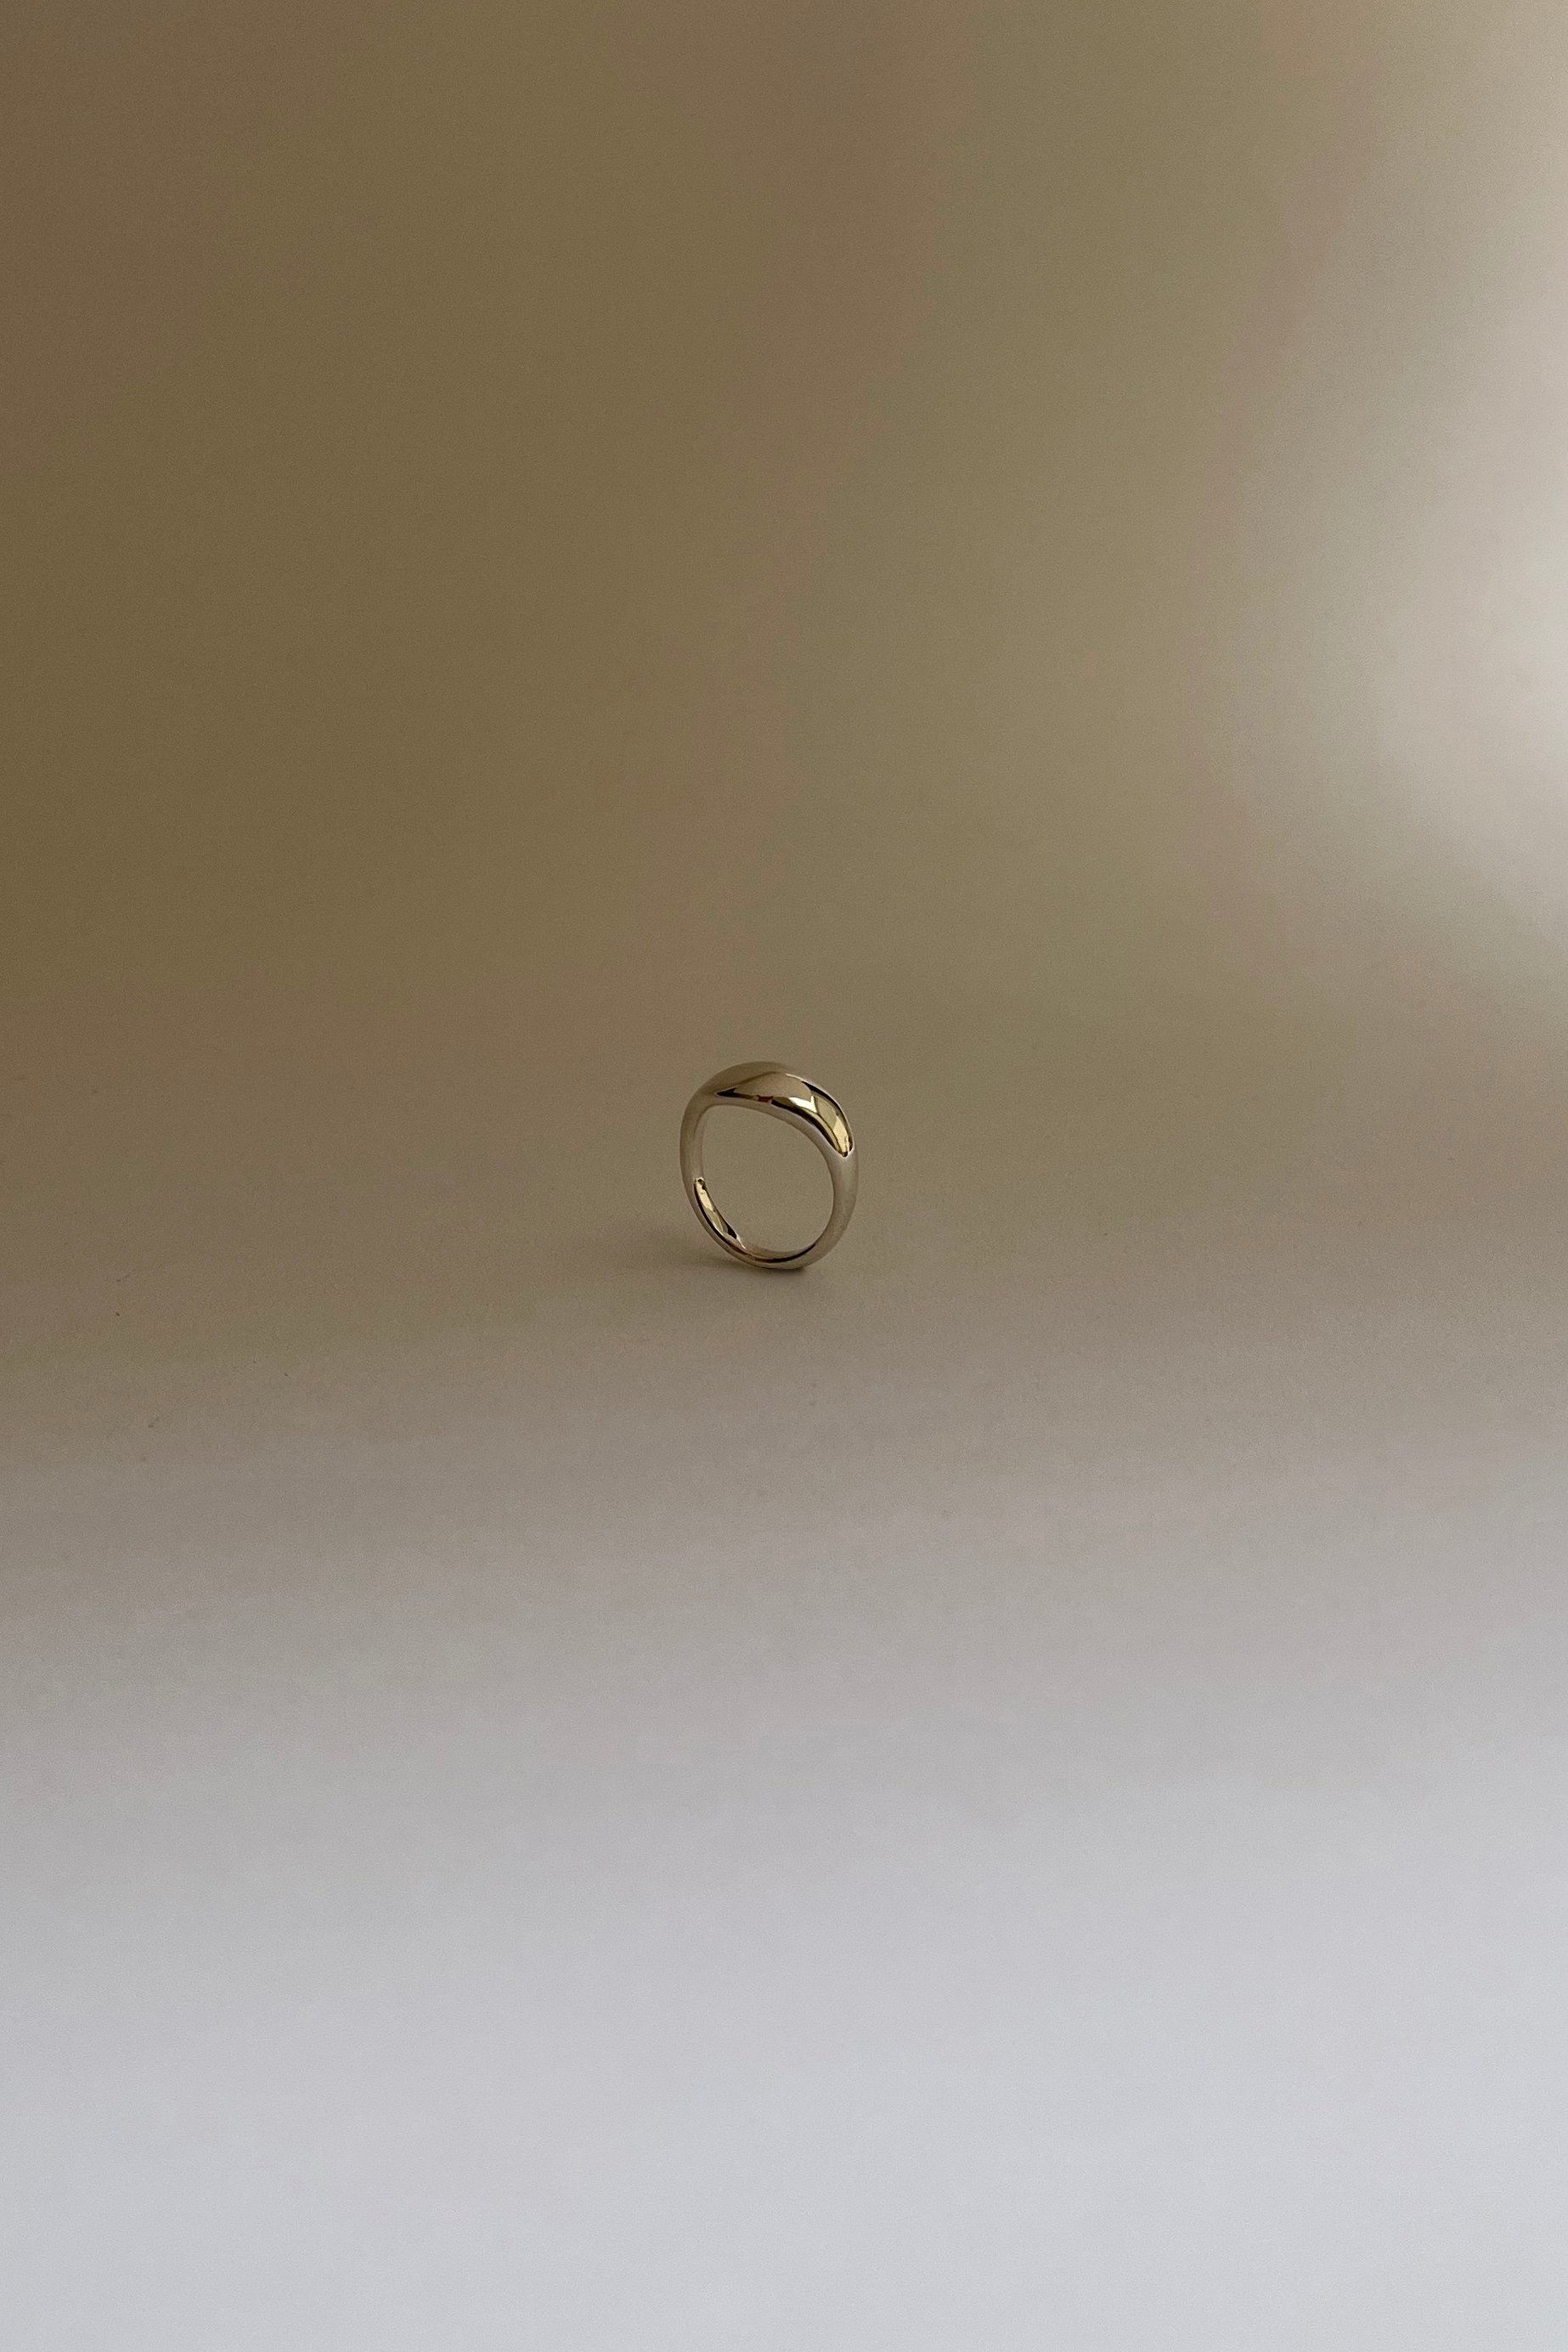 Image of Edition 4. Piece 11. Ring 